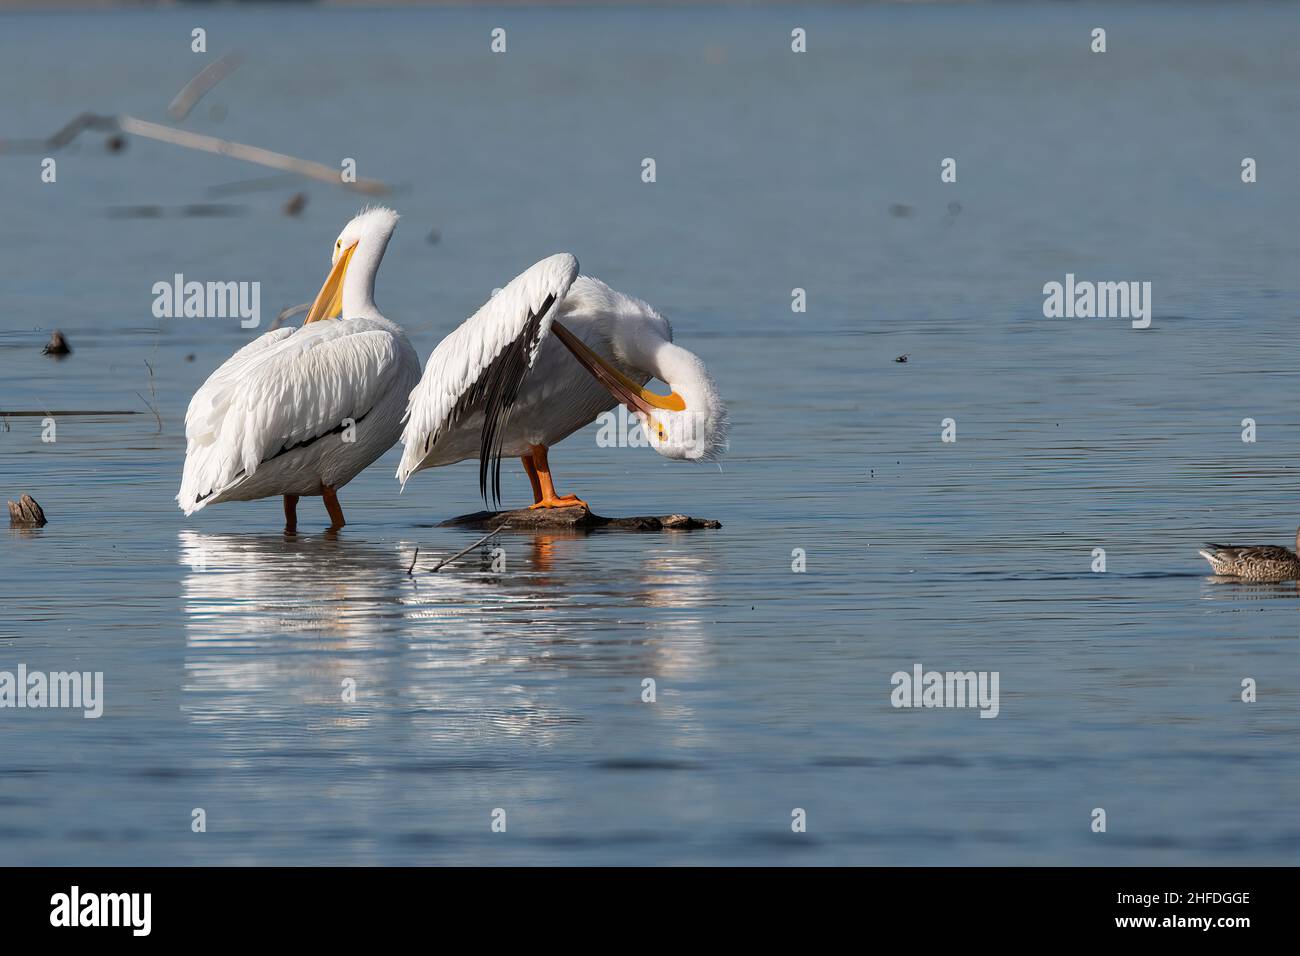 A pair of White Pelicans standing in the shallow water of White Rock Lake in Dallas, Texas while using their large beaks to preen their feathers. Stock Photo